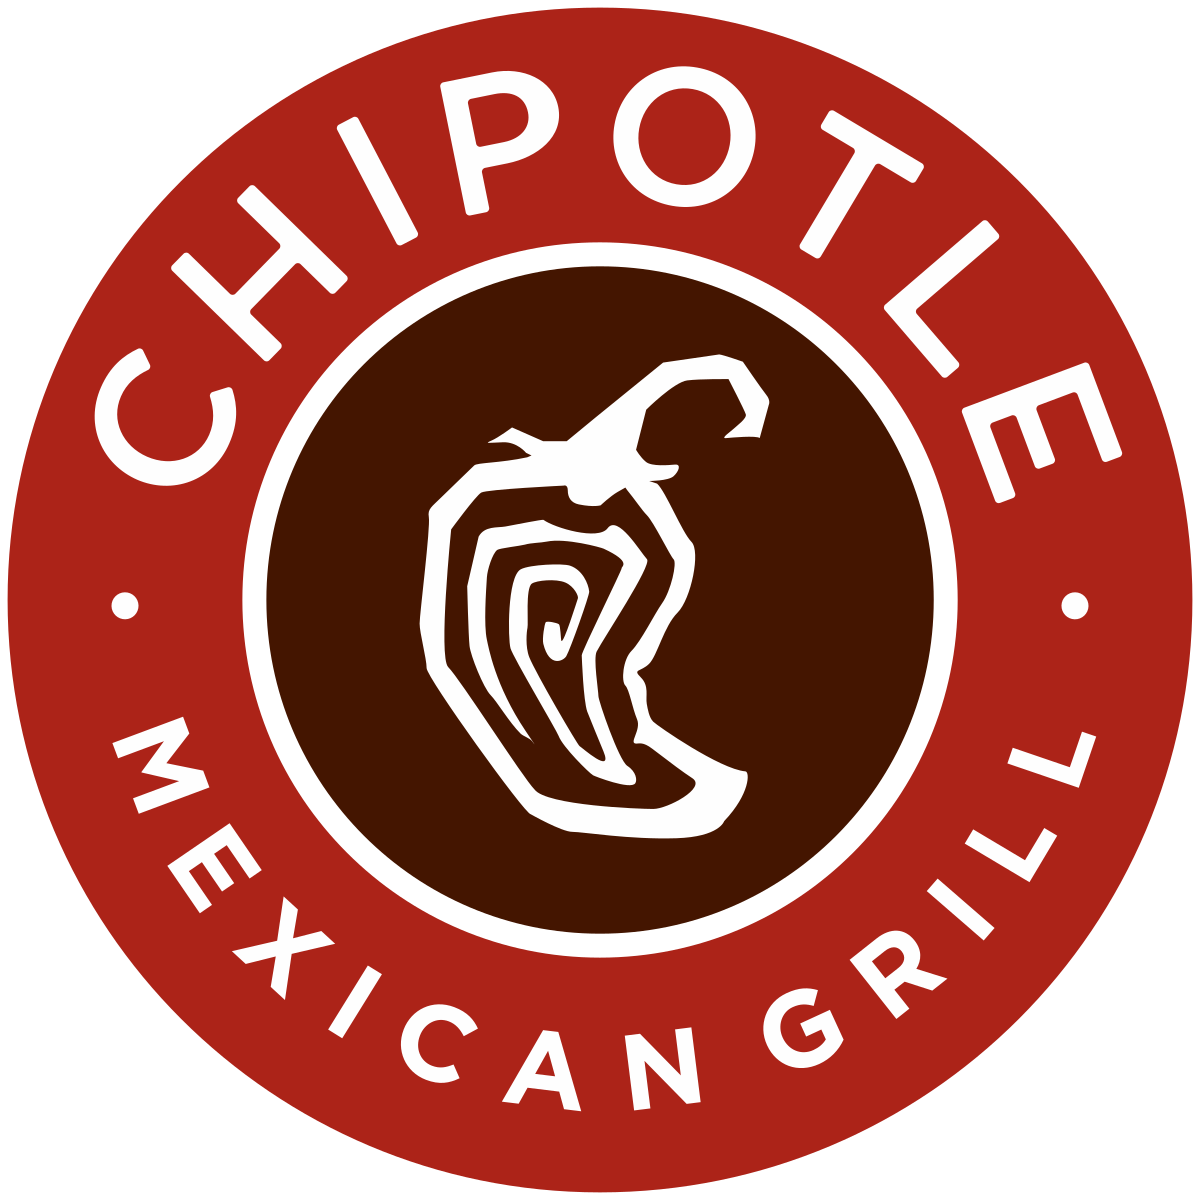 Chipotle logo.png